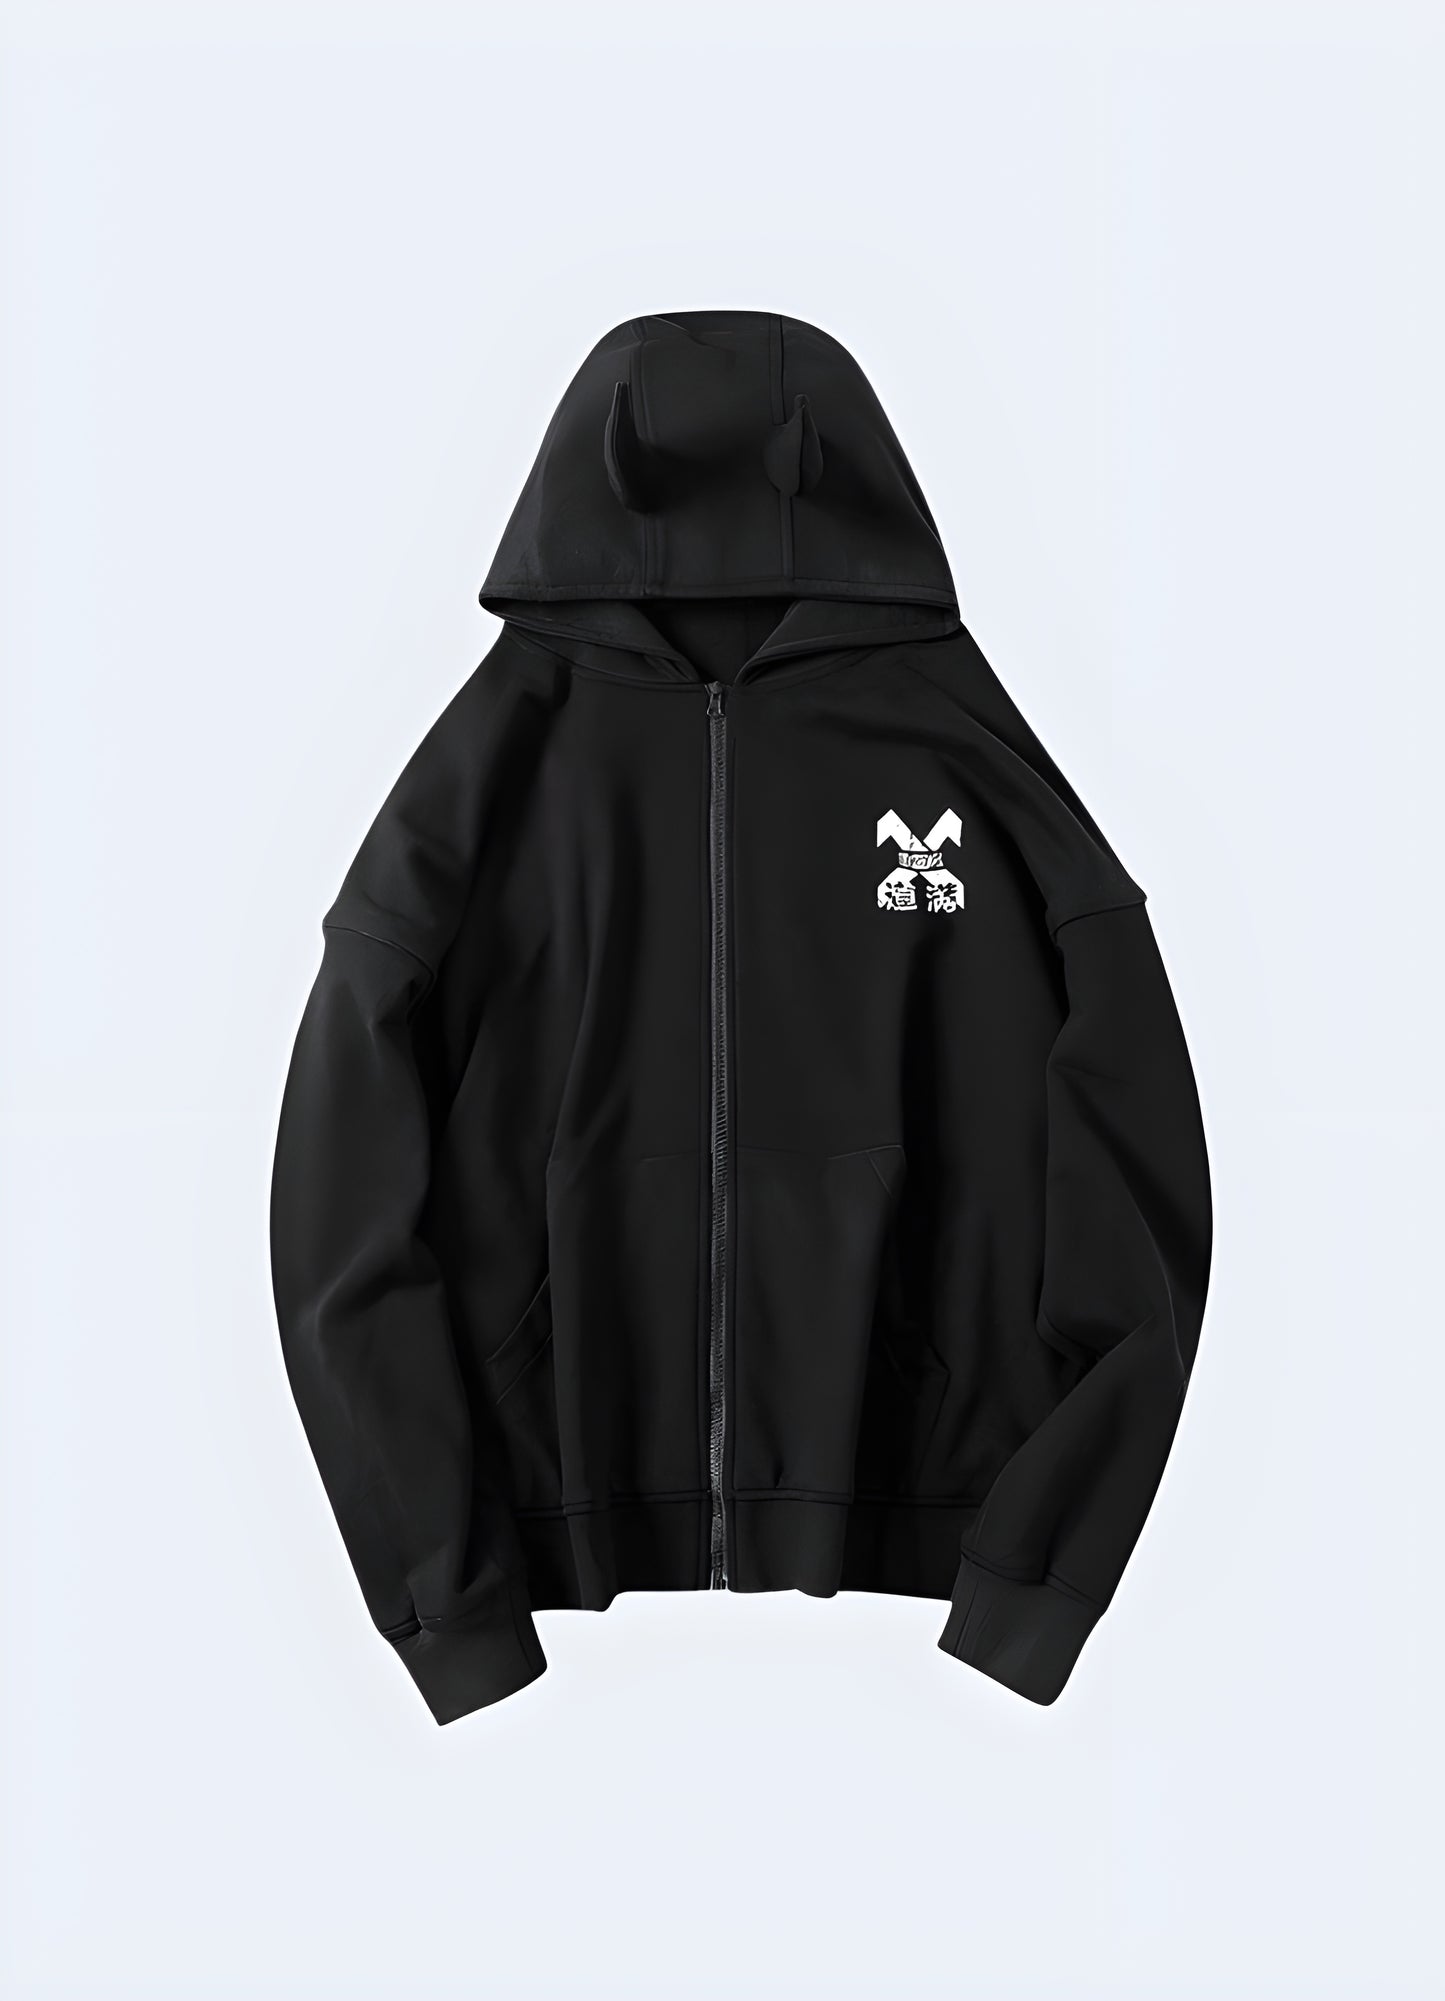 This zip-up hoodie distinguishes itself by its intimidating black hue and transformative japanese design.